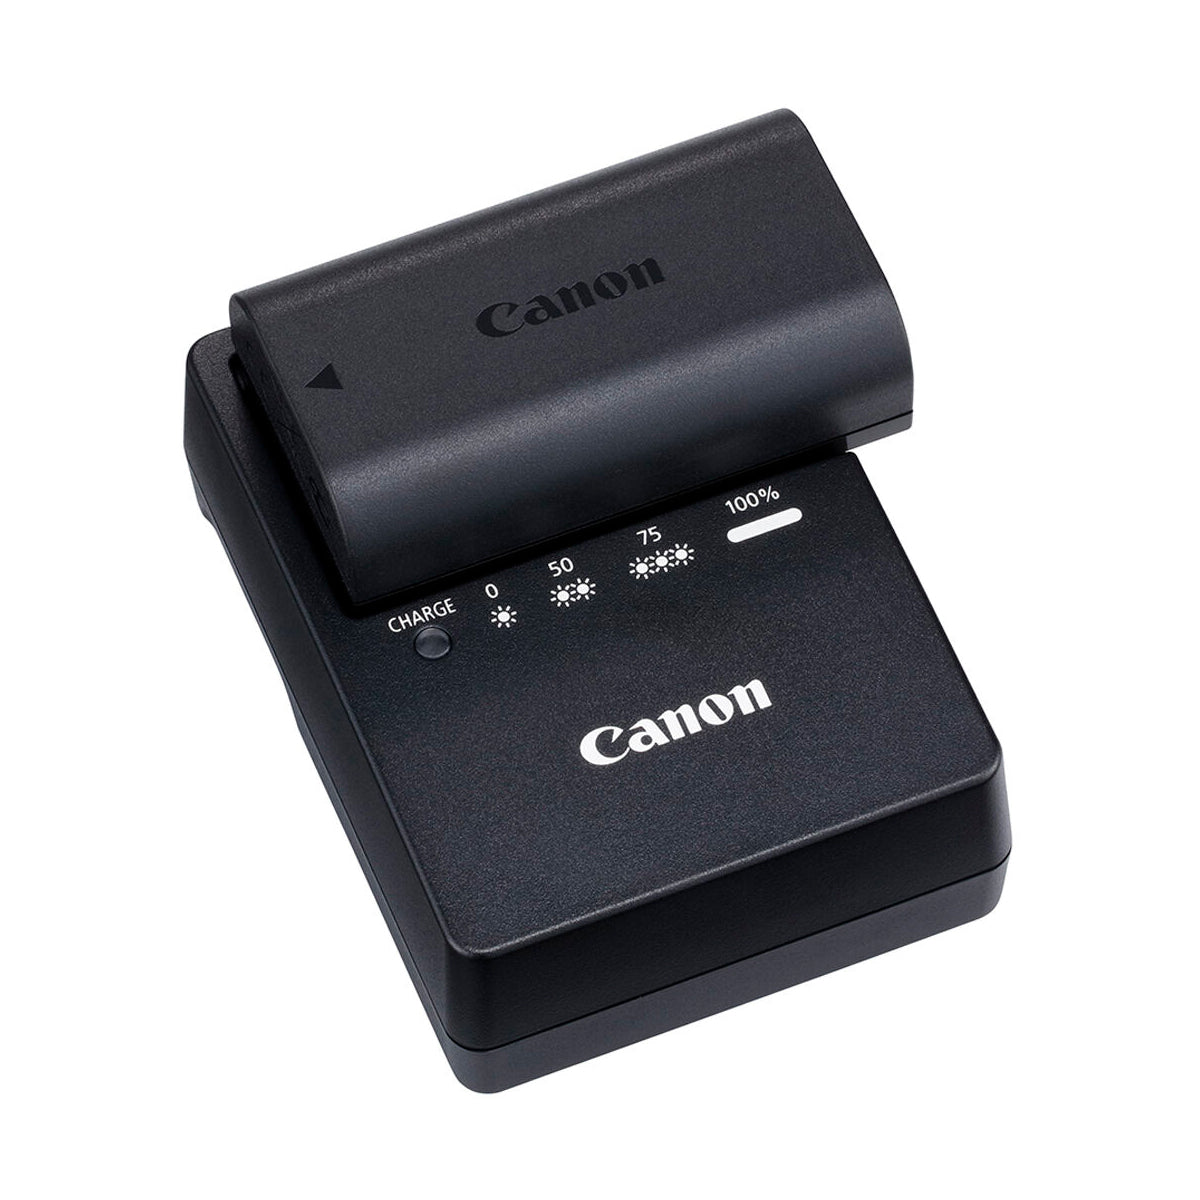 Canon CP-E4N Compact Battery Pack